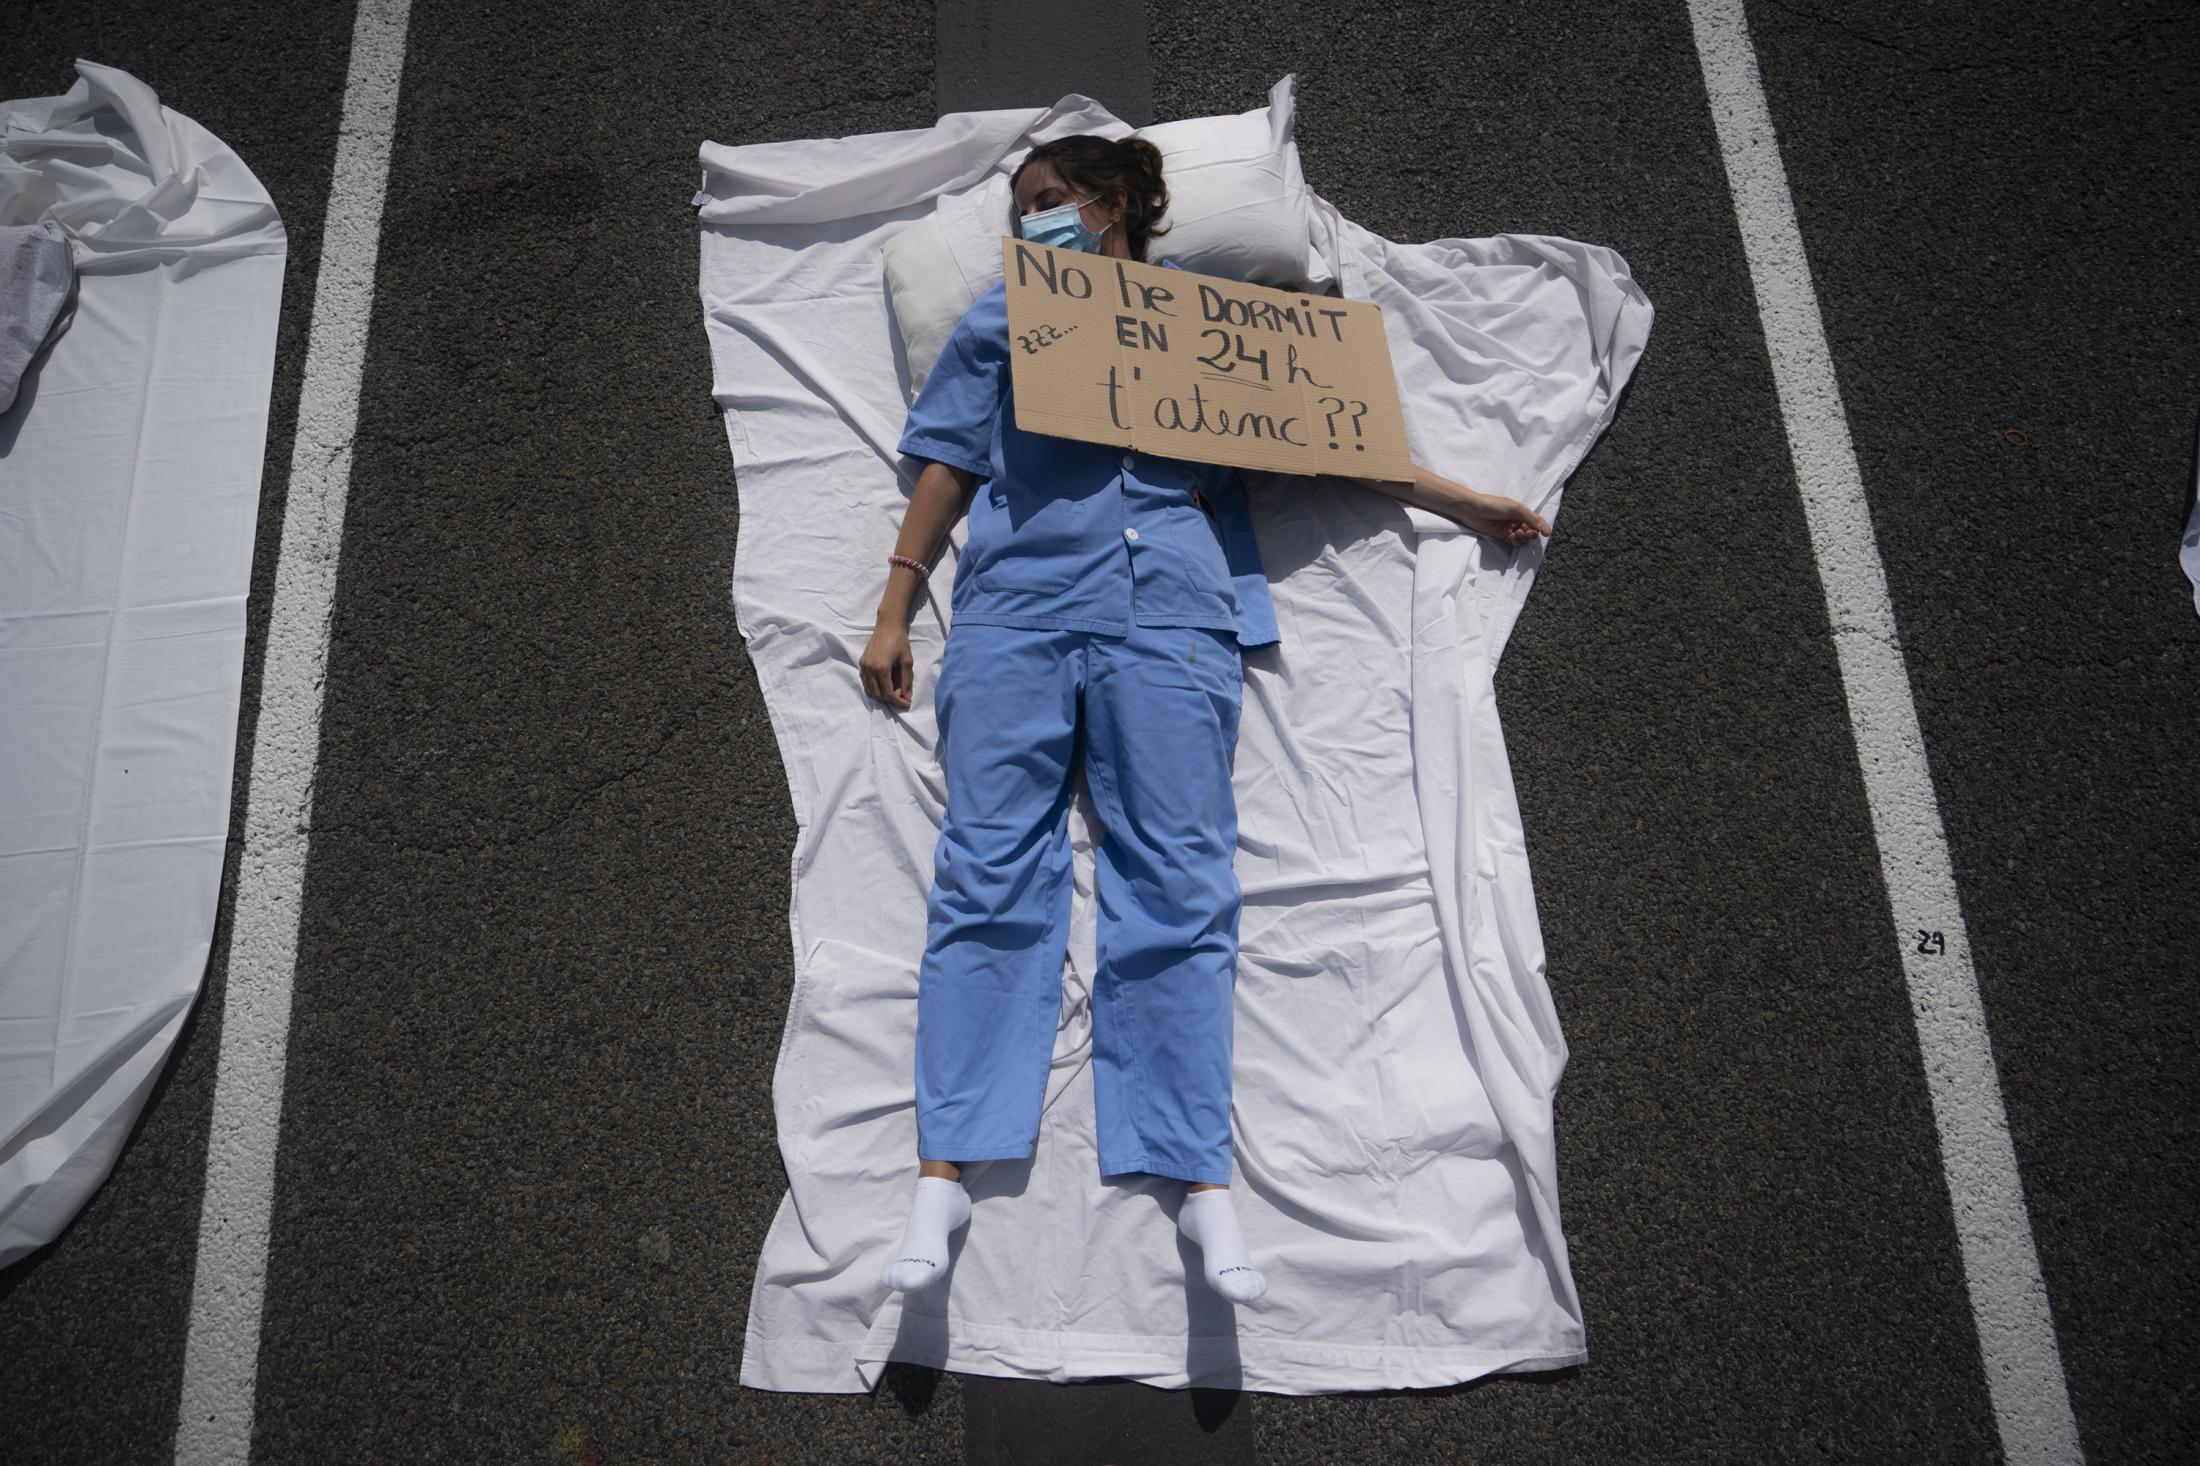 Singles -  A resident doctor lays on the ground of an avenue with a...